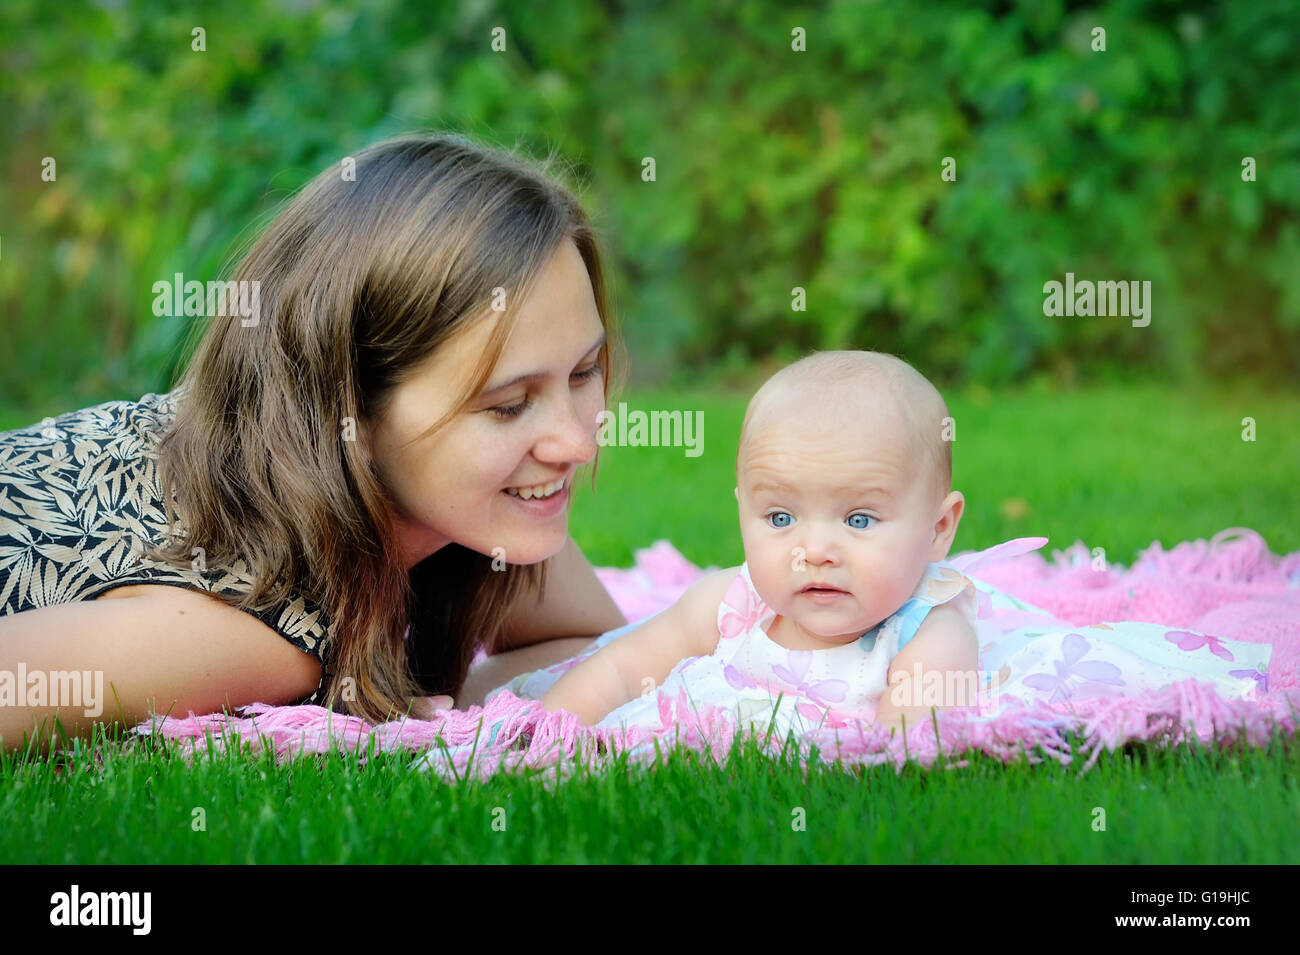 Portrait of happy loving mother and her baby outdoors Stock Photo